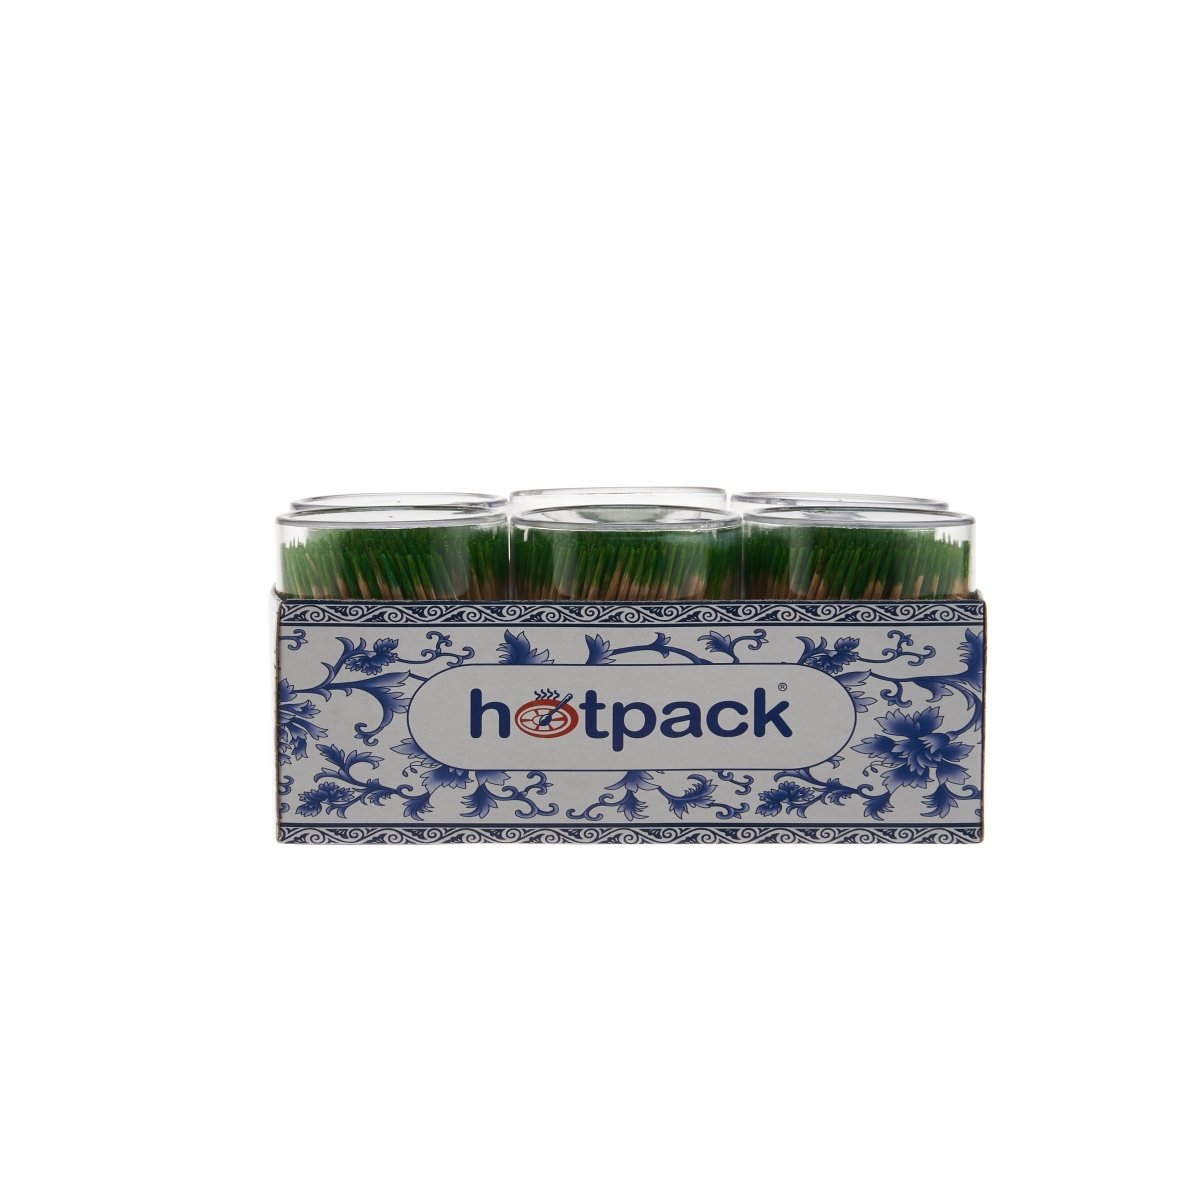 Toothpick with Minted Ends - hotpackwebstore.com - Toothpick